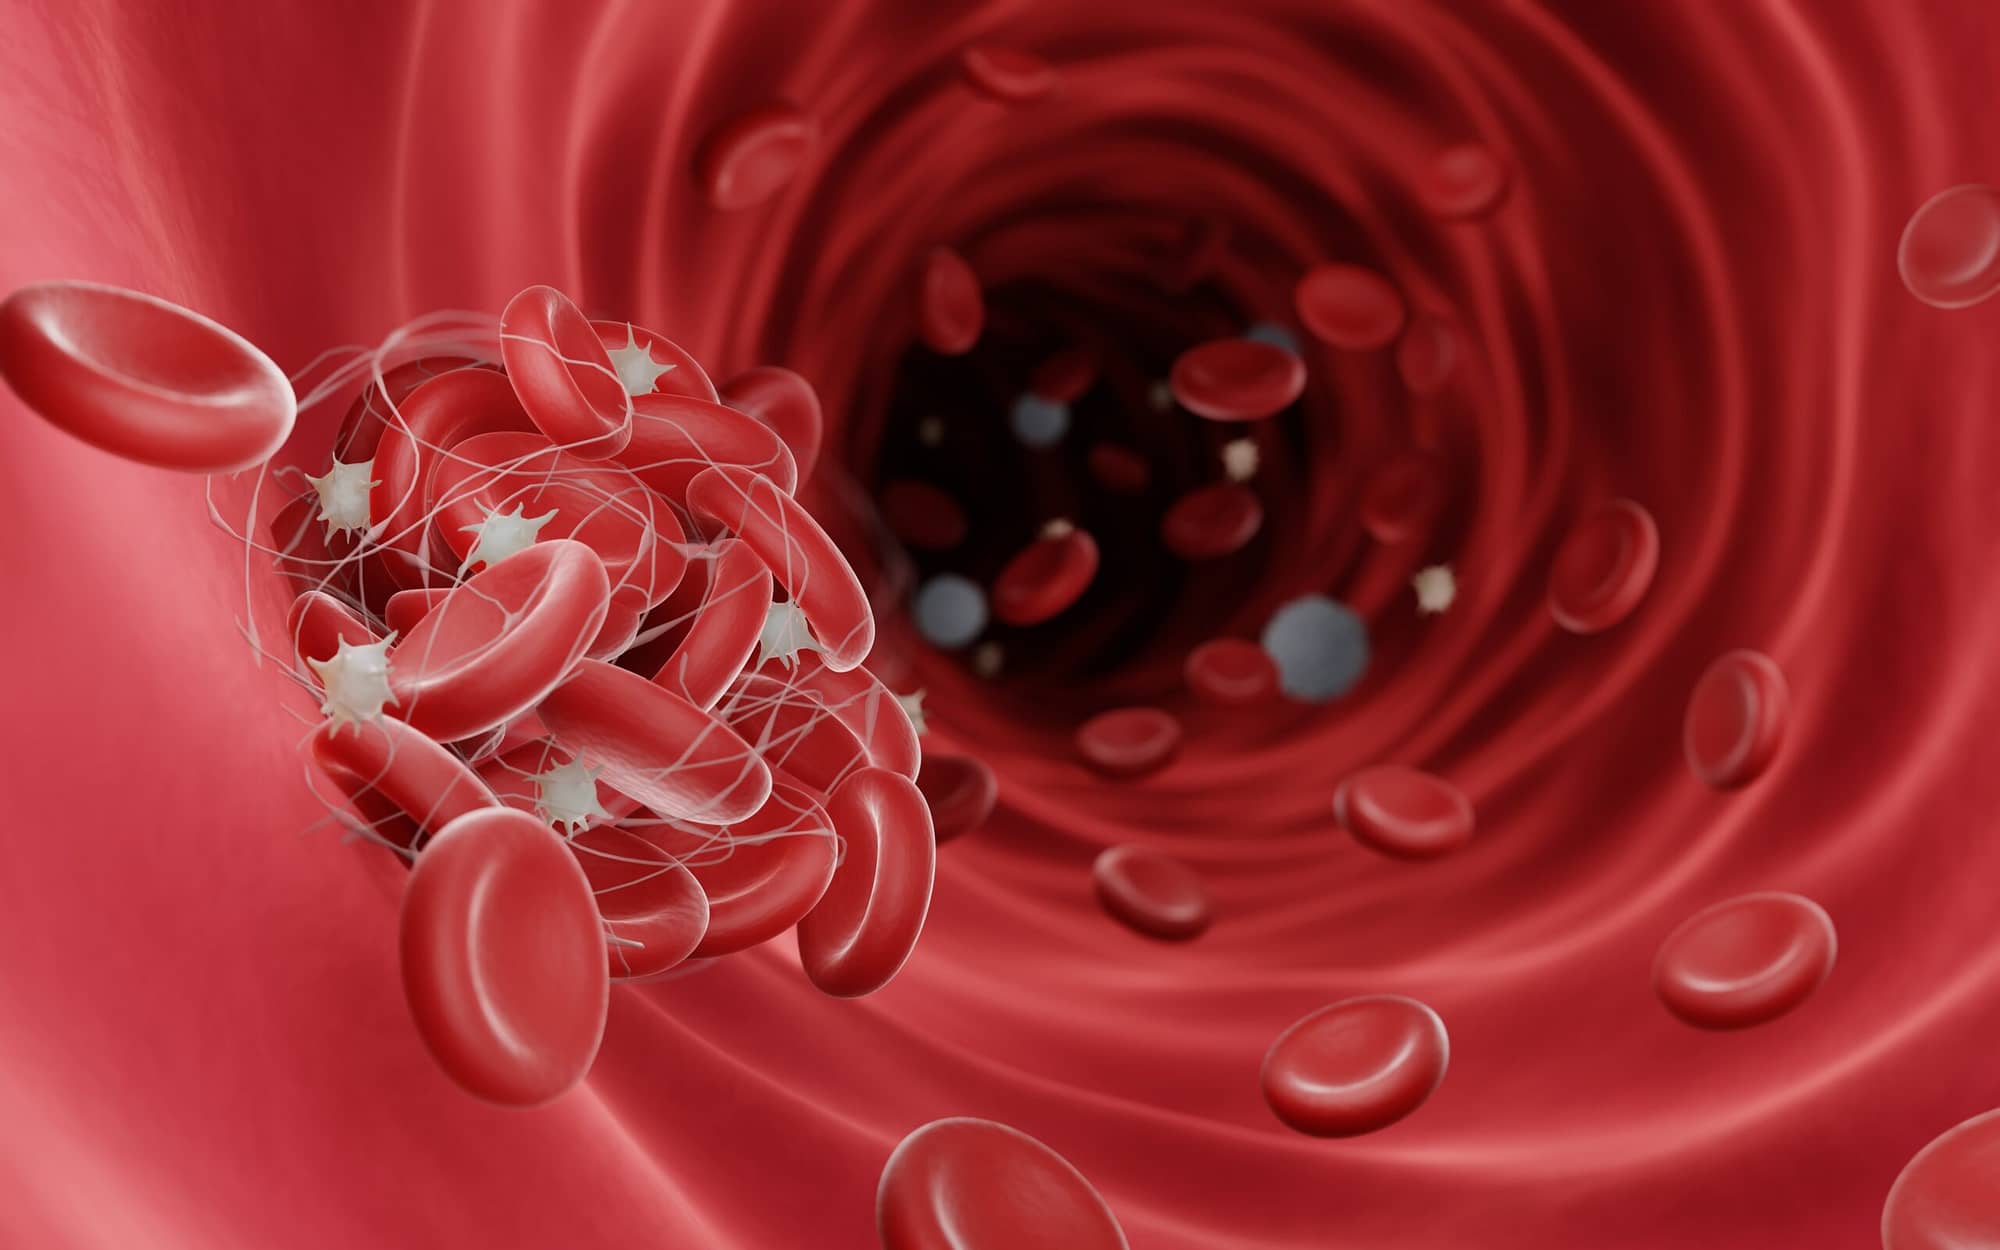 Blood clots (fibrin clots) are usually formed to stop the bleedi